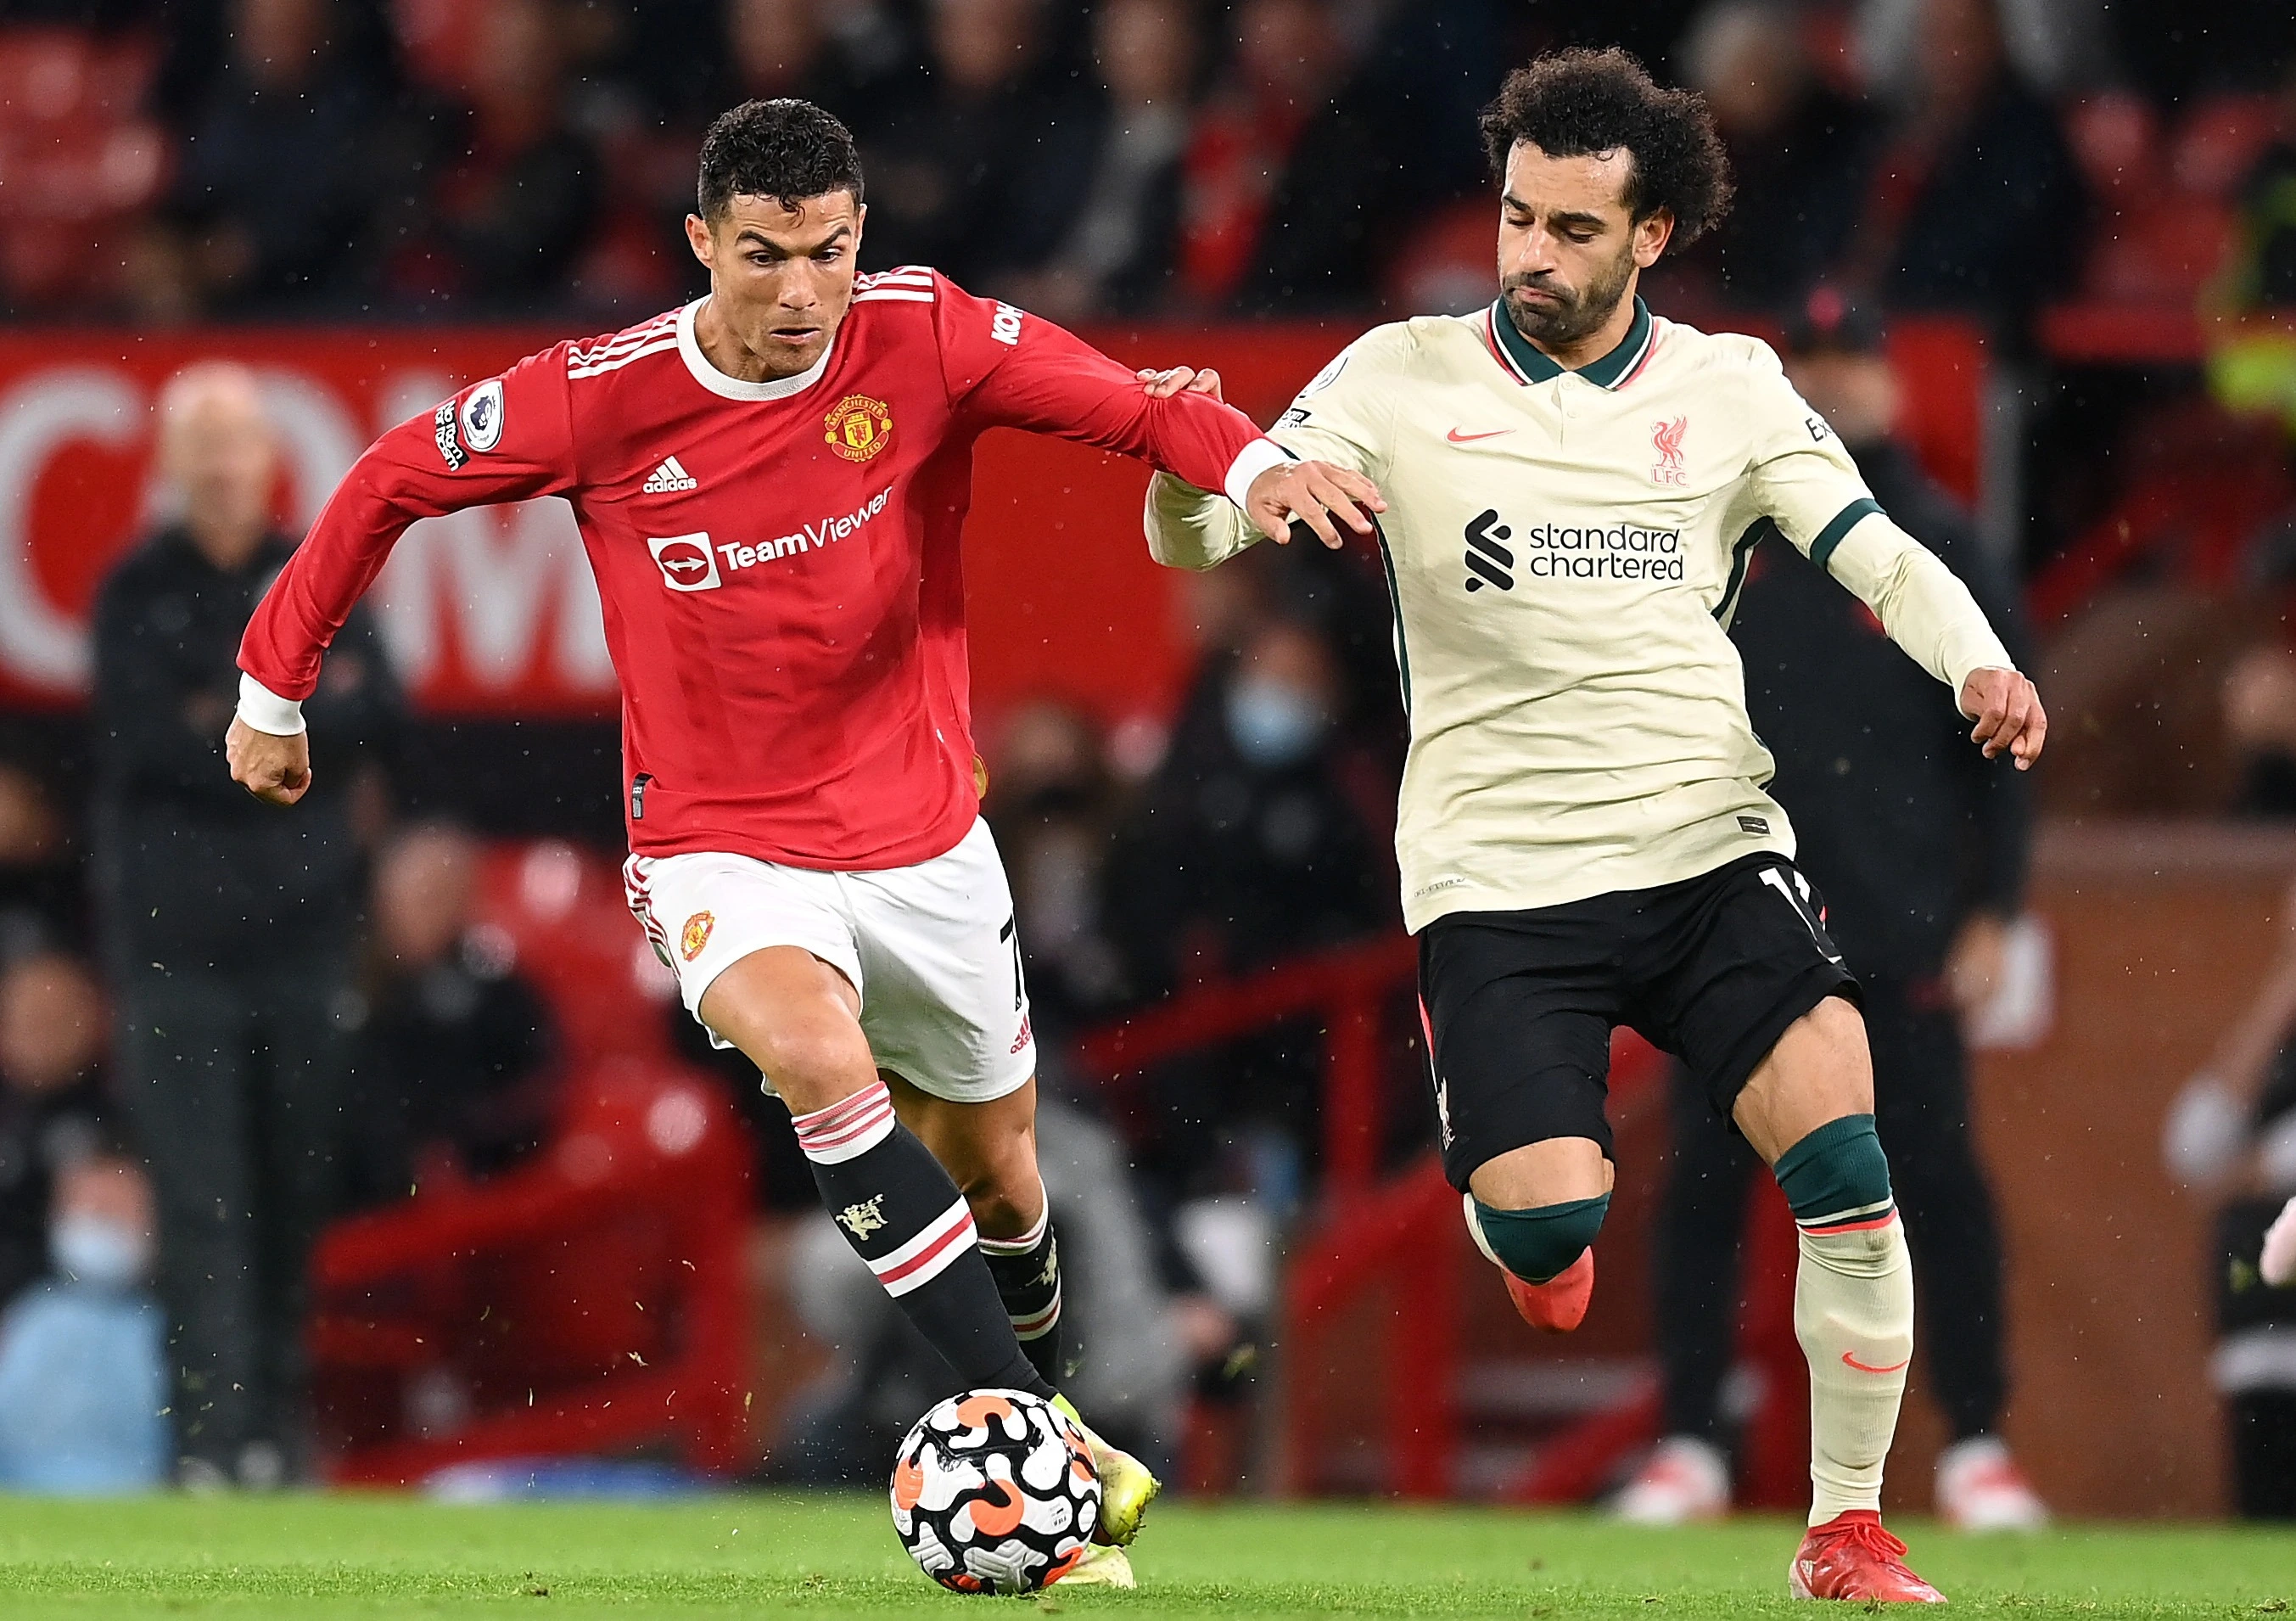 Liverpool vs Manchester United Prediction, Betting Tips and Odds | April 19, 2022